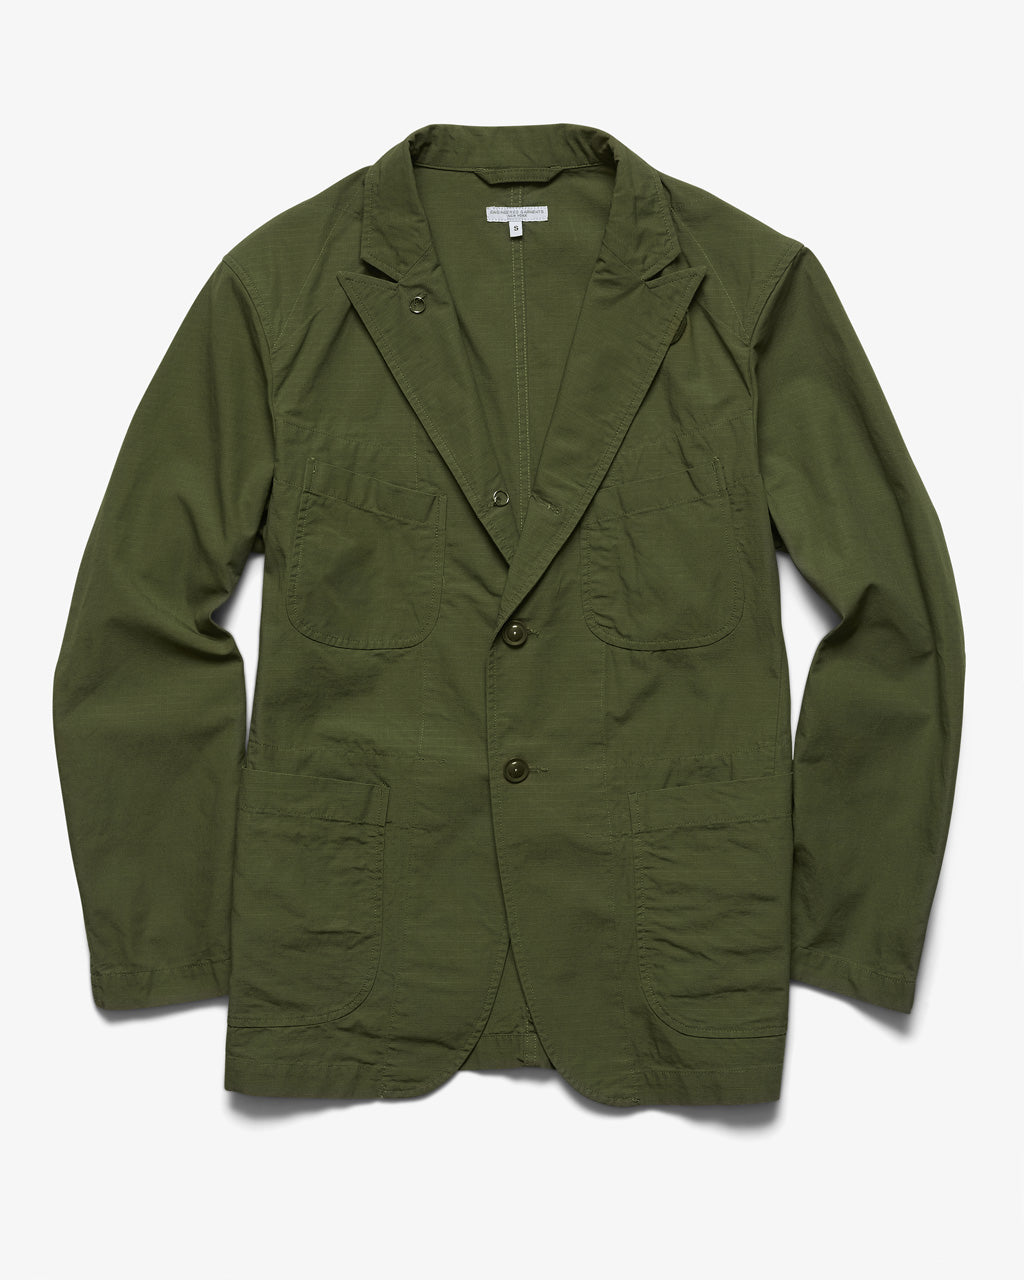 ENGINEERED GARMENTS | BEDFORD JACKET OLIVE COTTON RIPSTOP | Supply & Advise